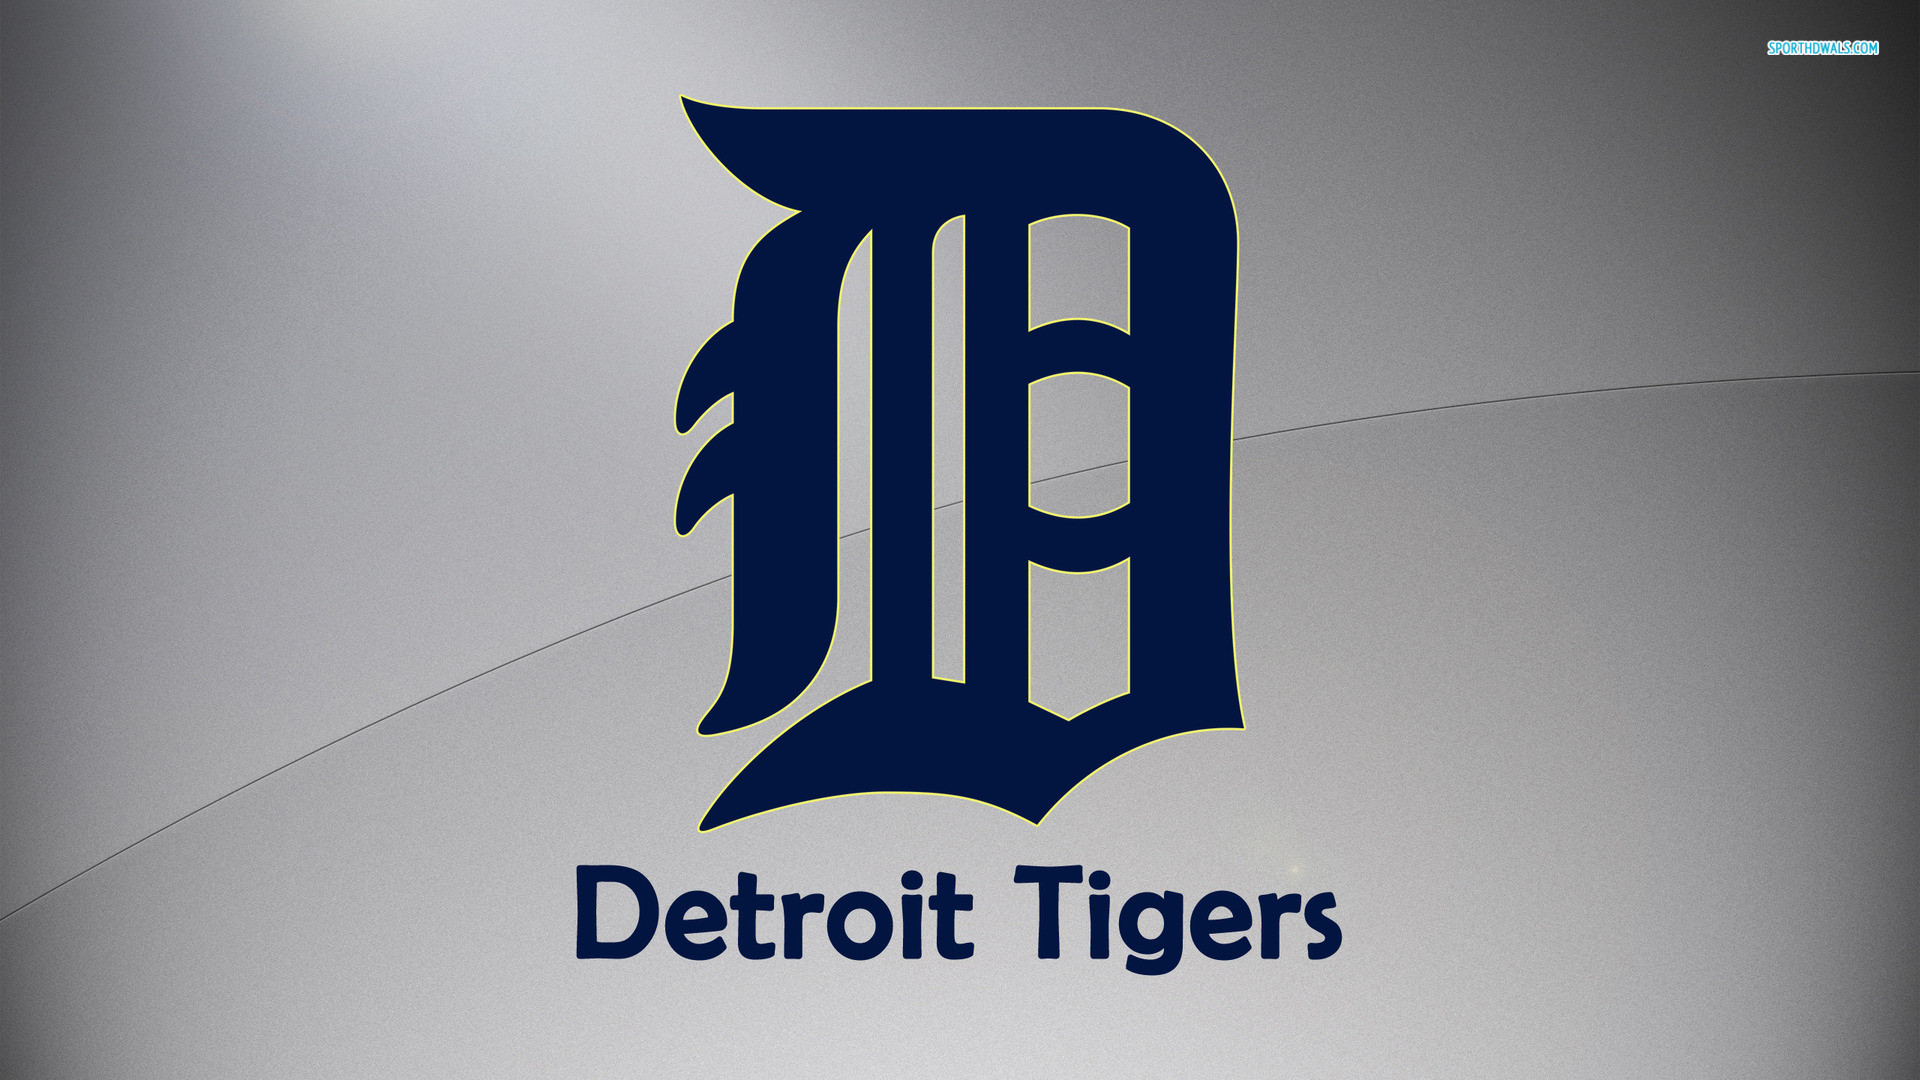 Detroit Tigers on X: Free wallpapers! Get your free wallpapers!  #WallpaperWednesday  / X